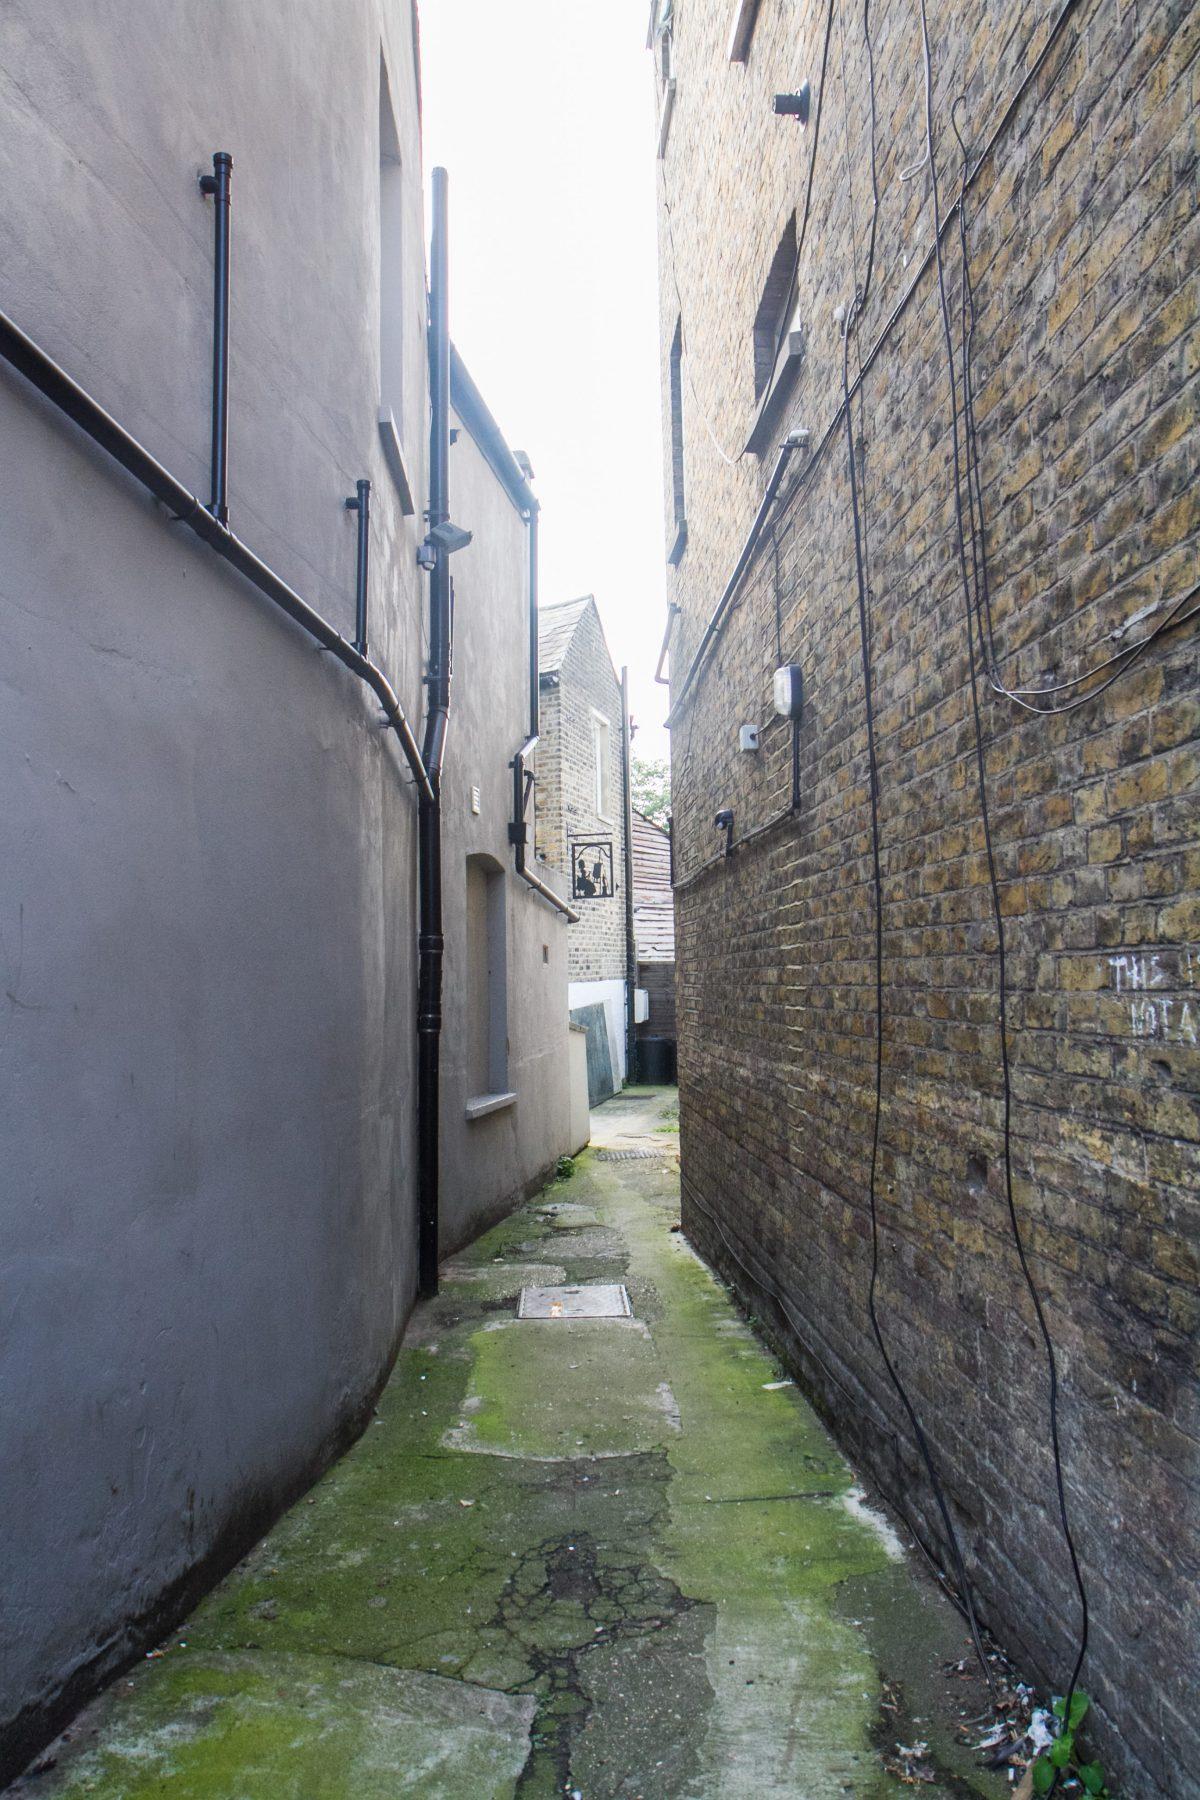 The alley that leads to The Barnes Atelier of Art in London on Sept. 9, 2017. (Milene Fernandez/The Epoch Times)